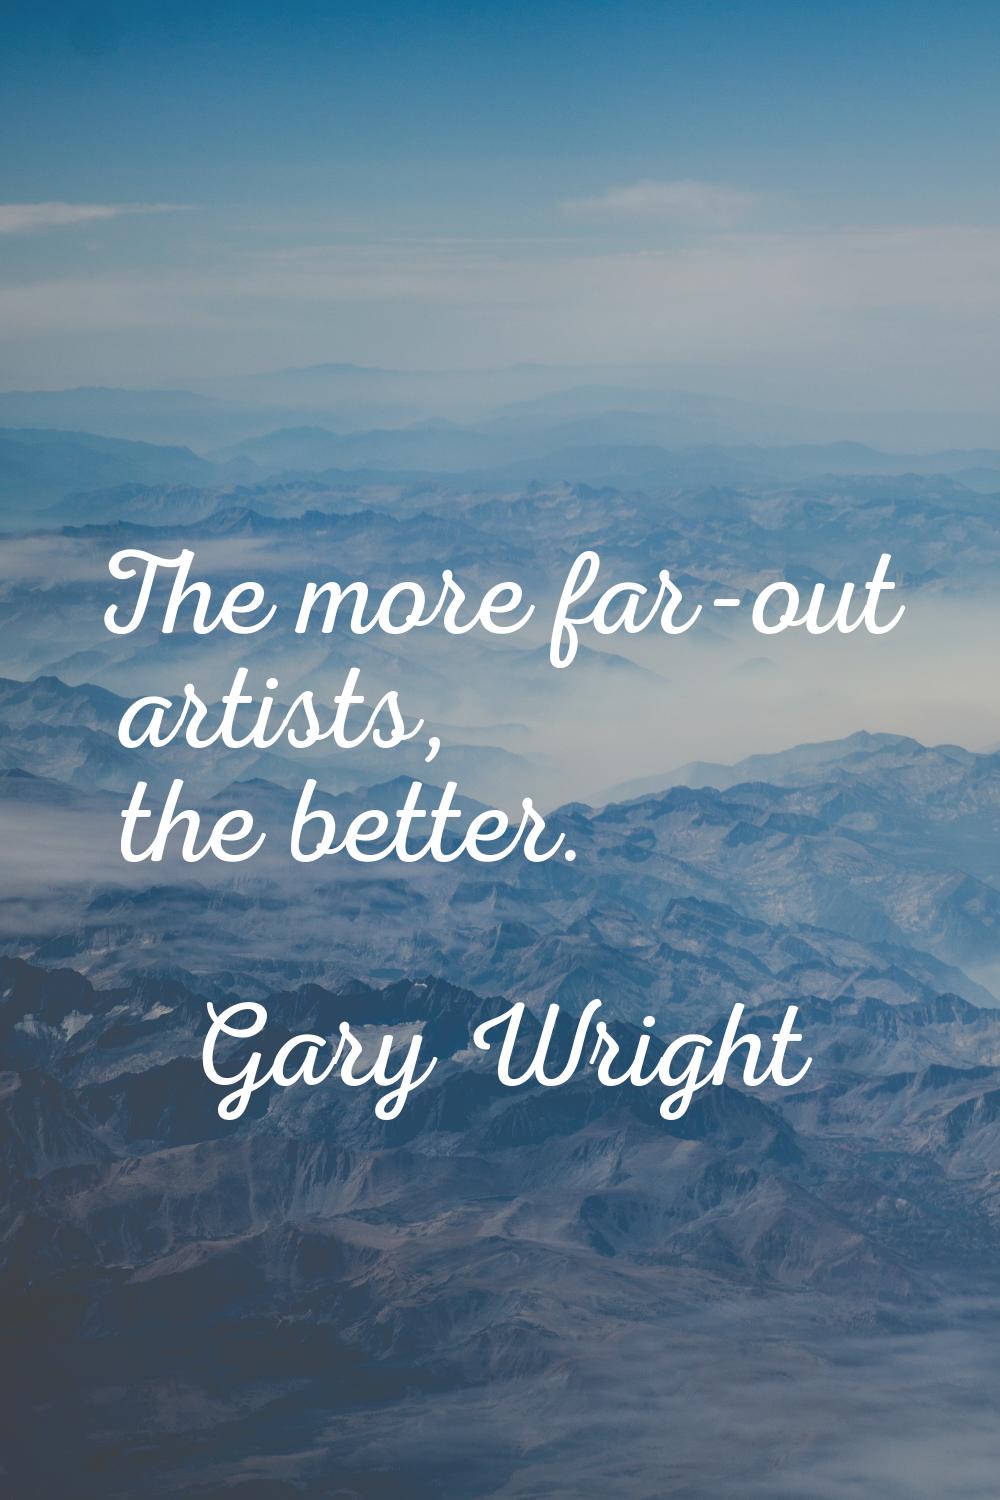 The more far-out artists, the better.